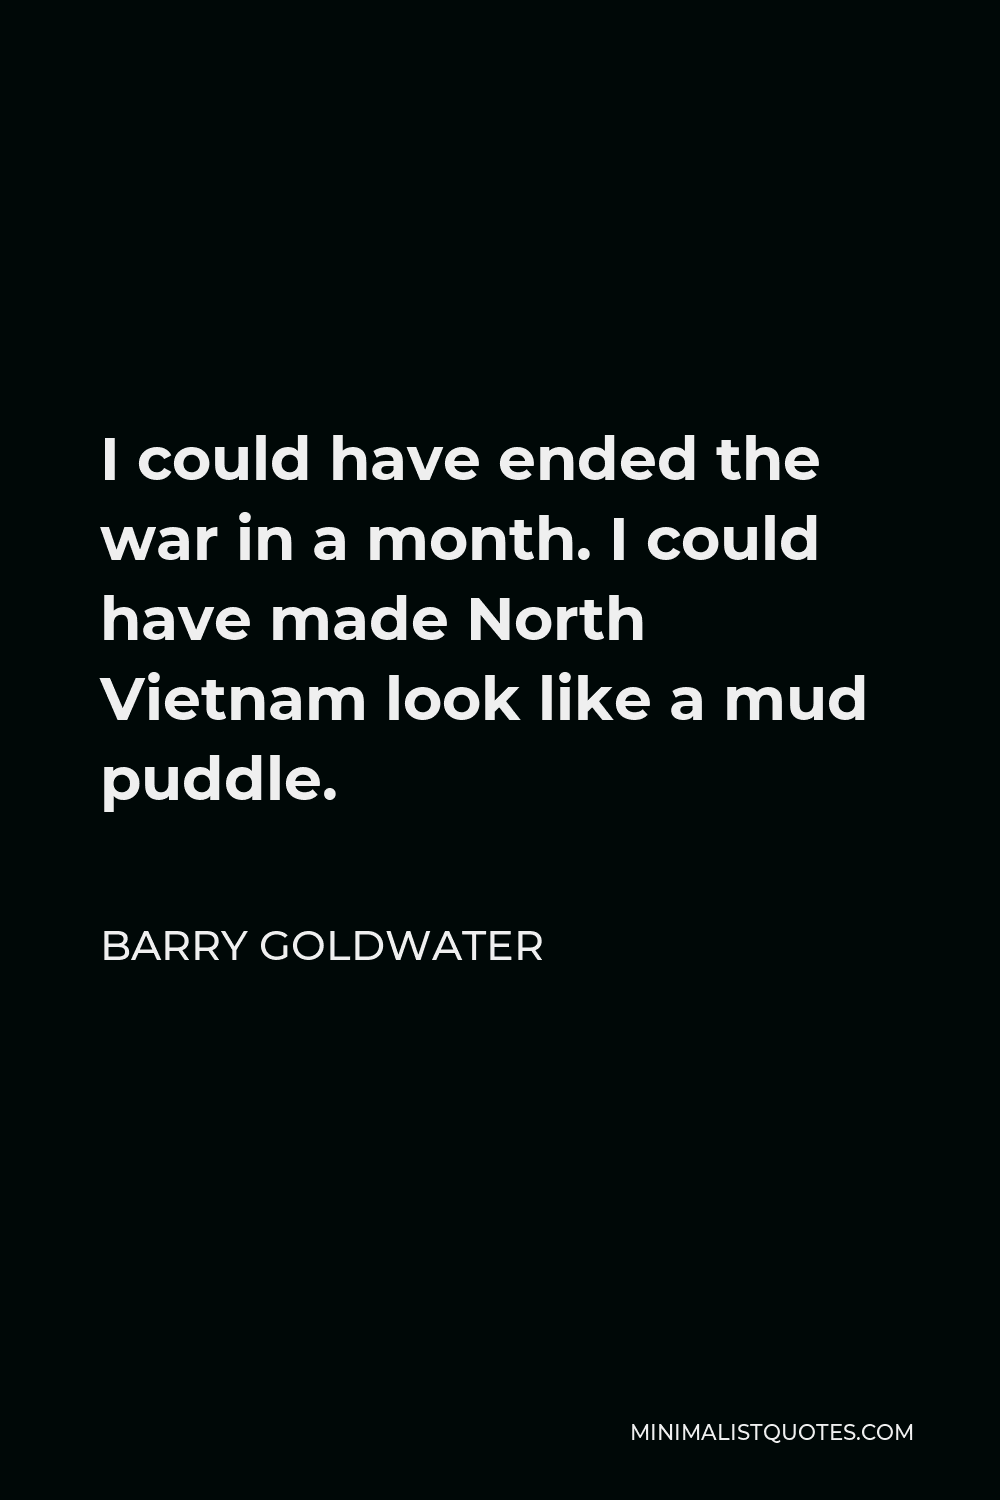 Barry Goldwater Quote - I could have ended the war in a month. I could have made North Vietnam look like a mud puddle.